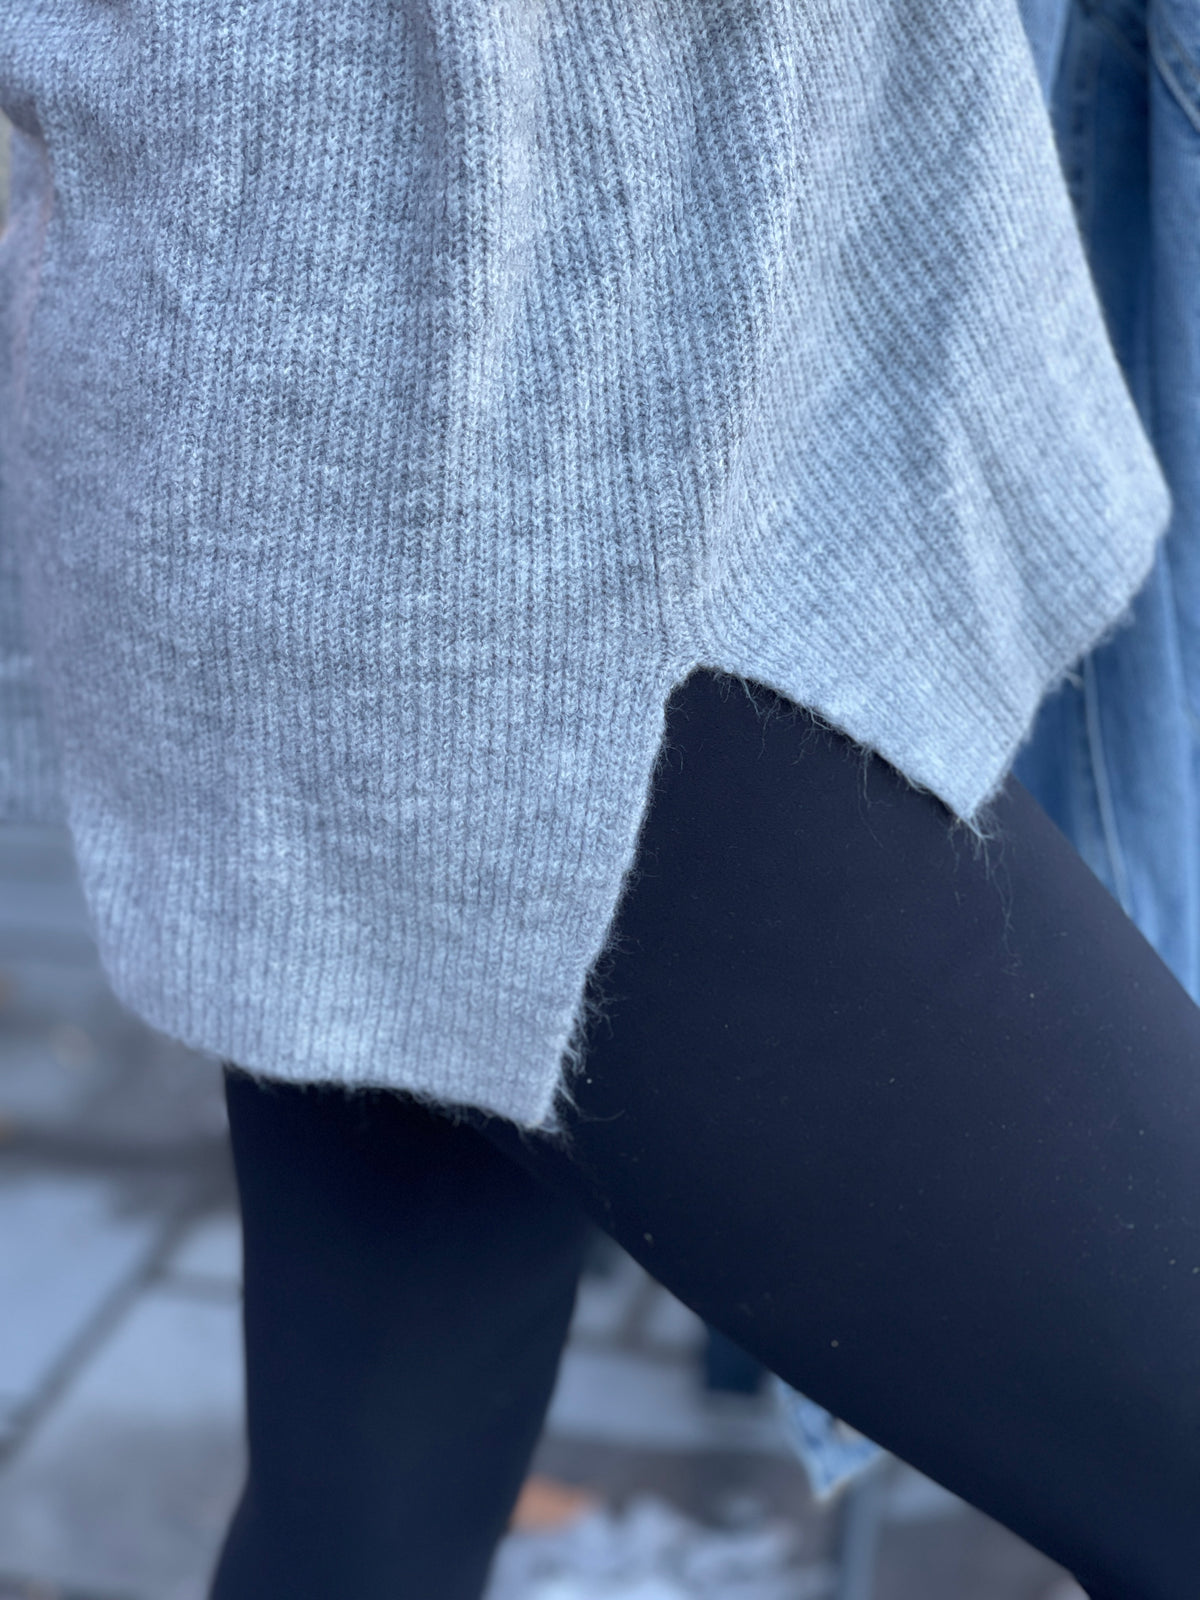 GREY SNAP BUTTON COLLARED SWEATER